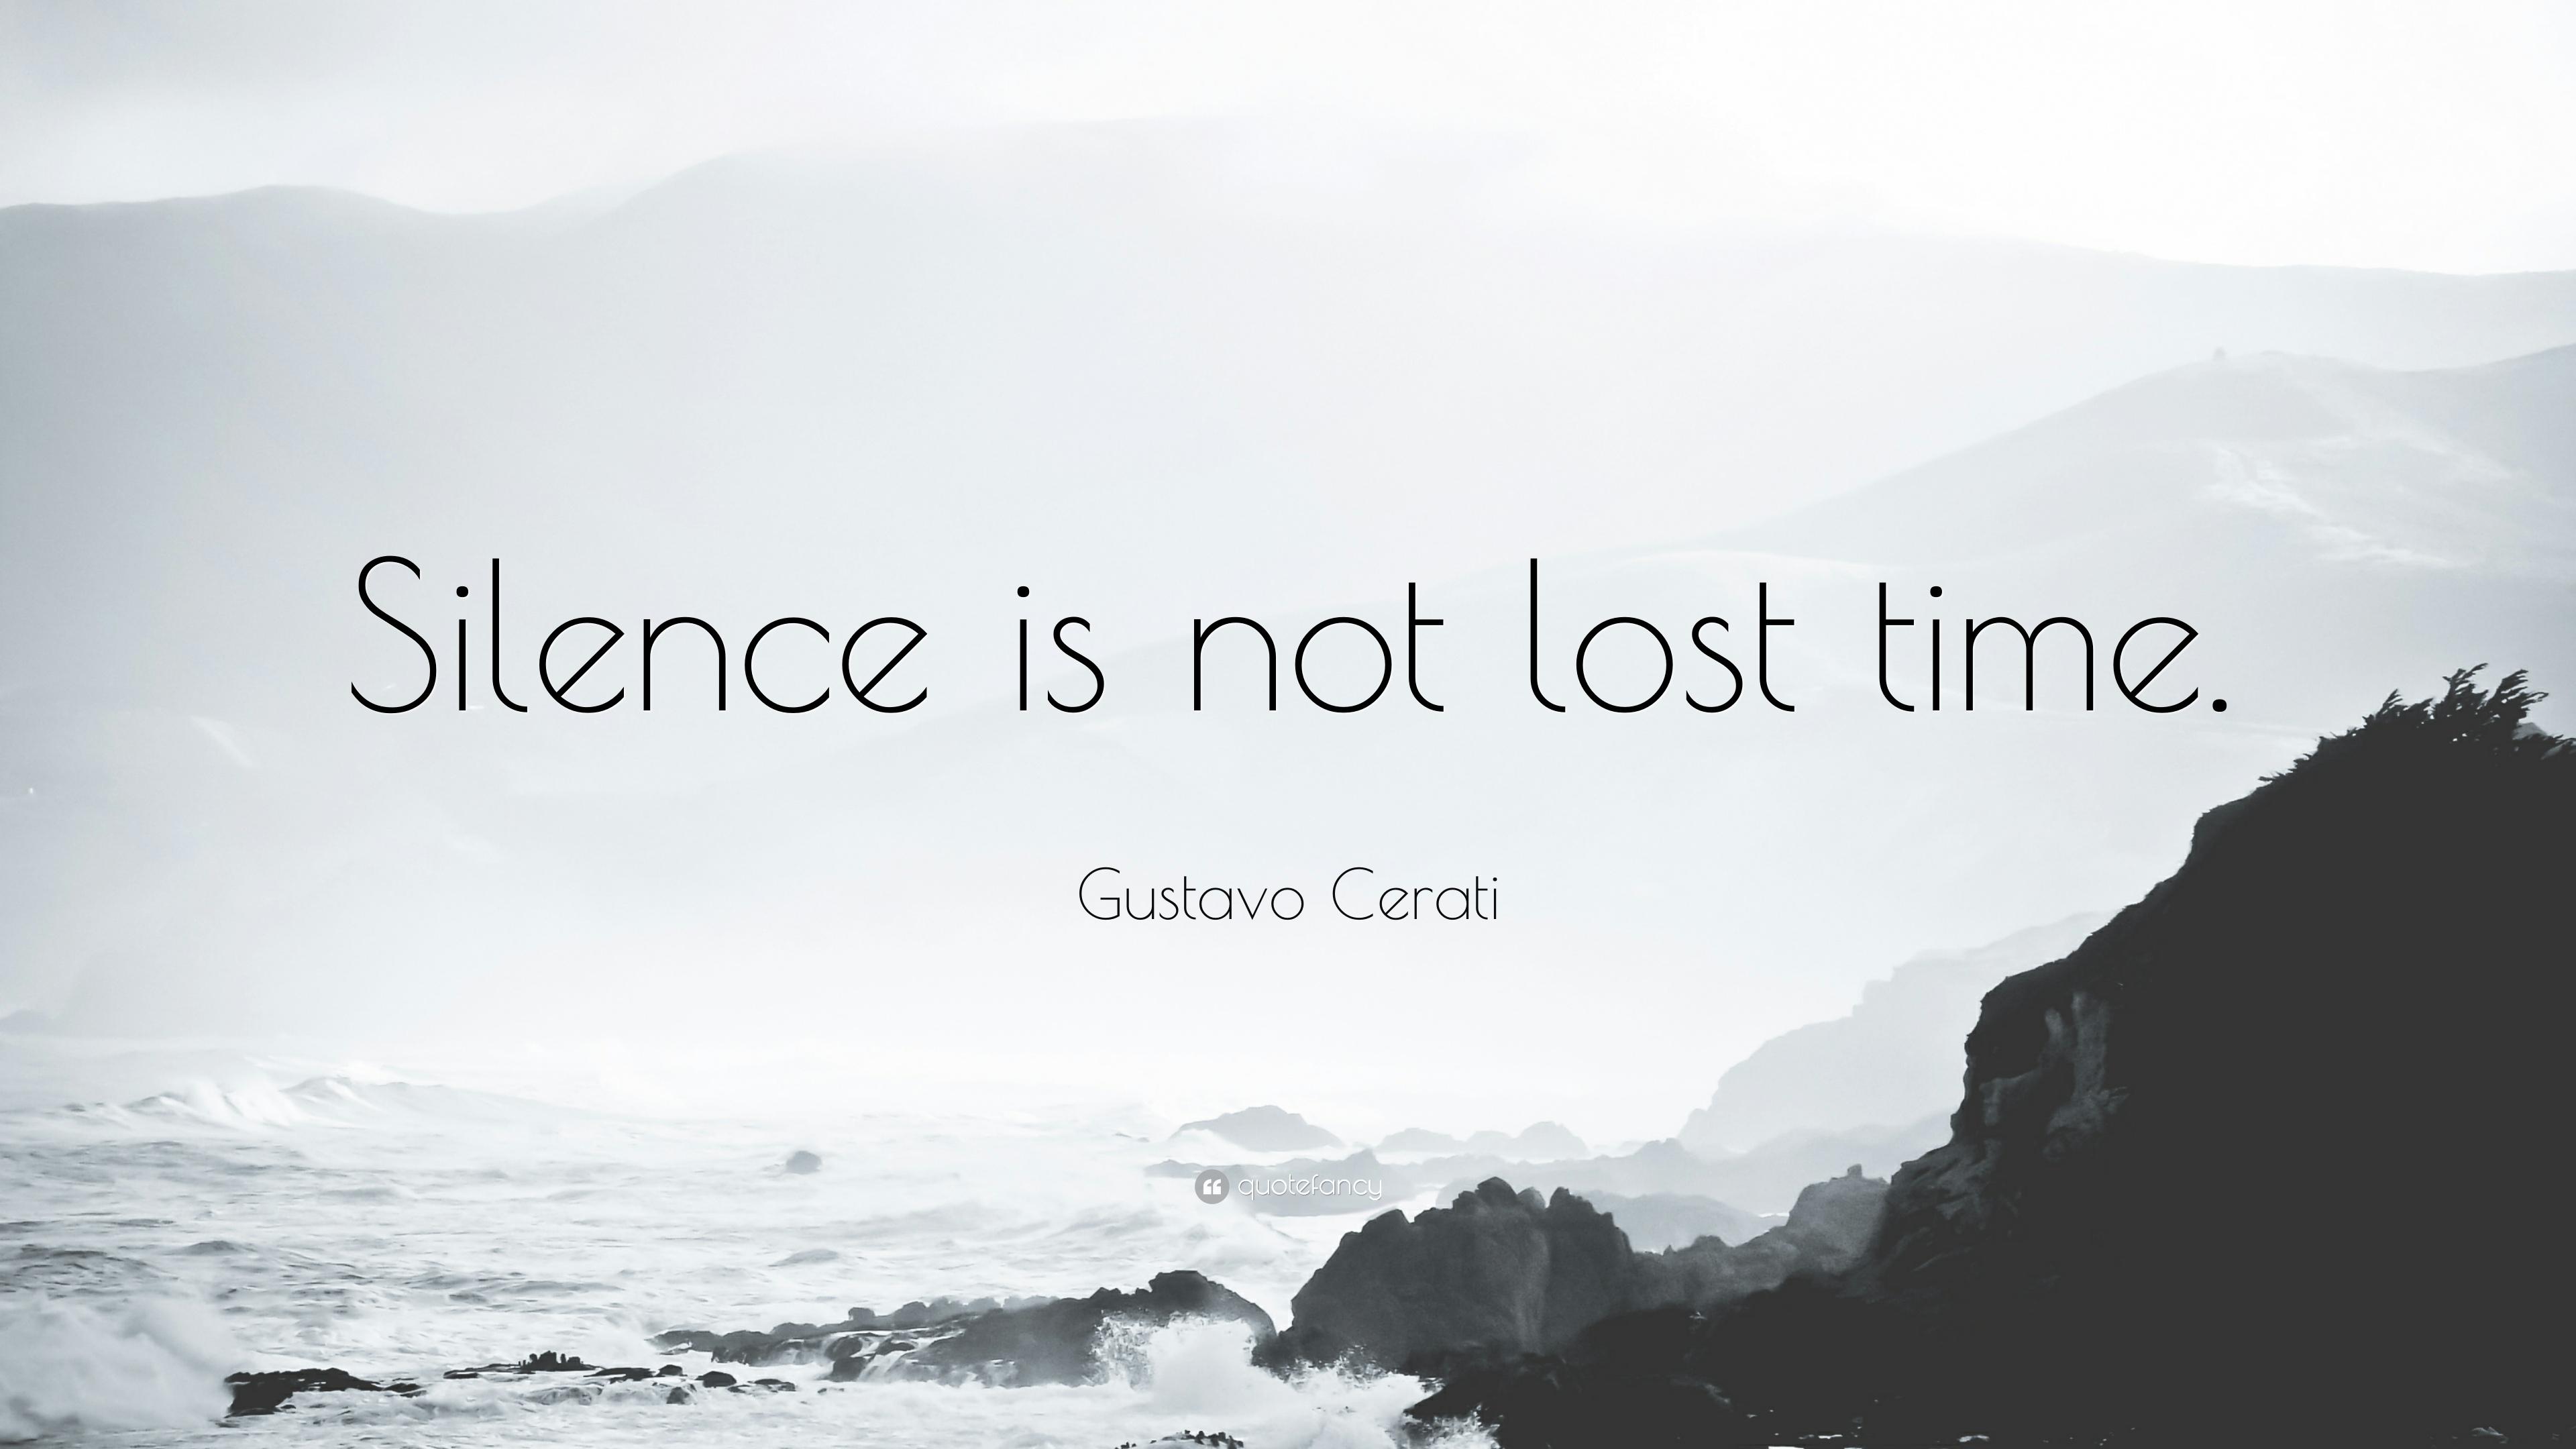 Gustavo Cerati Quote: “Silence is not lost time.” 12